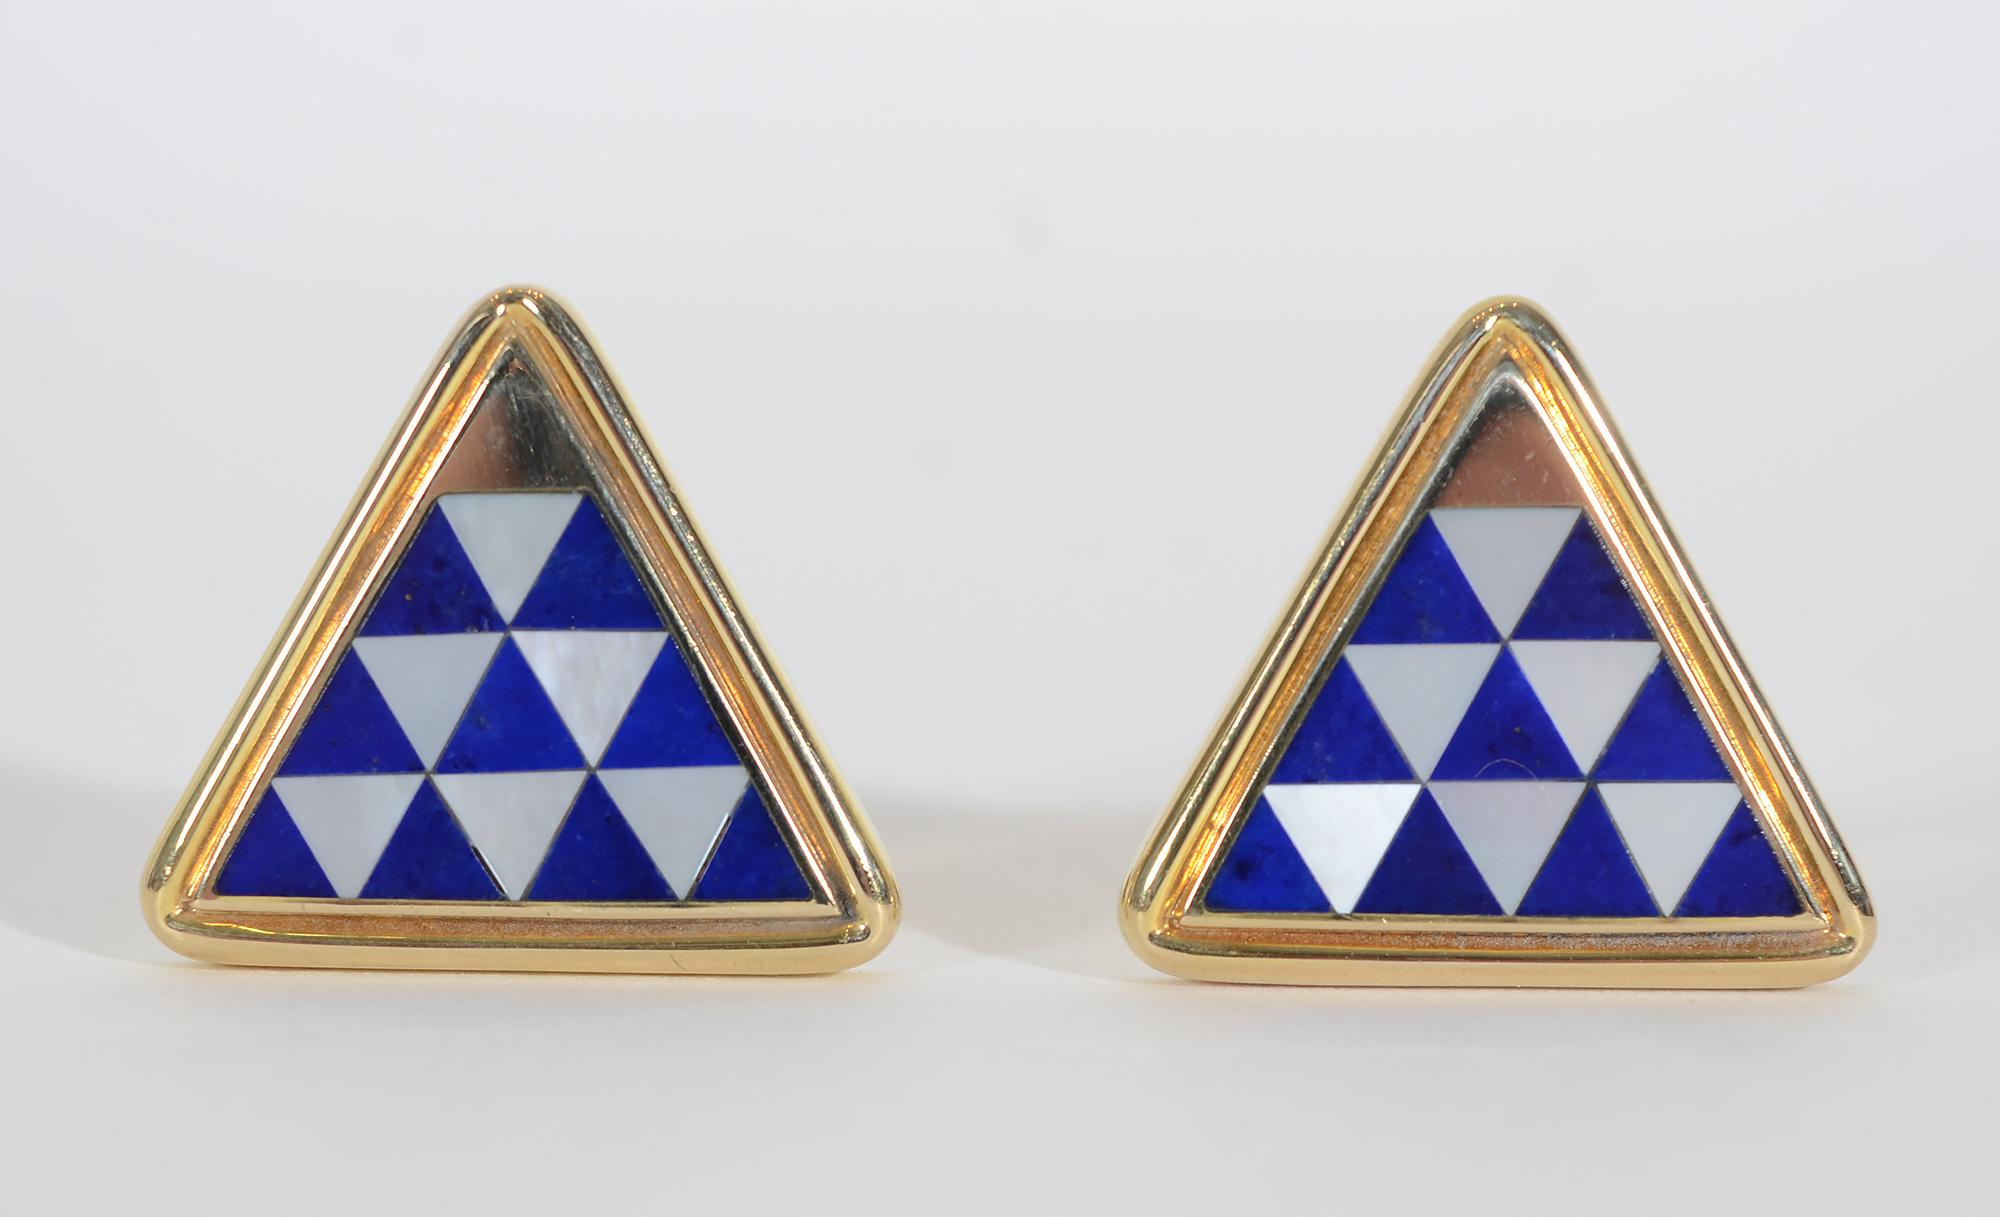 Beautifully made triangle shaped cufflinks by Asch Grossbardt. The interior triangles are made of Lapis lazuli; mother of pearl and gold. The backs are also inlaid with lapis as seen in last thumbnail photo. Measurements are 13/16